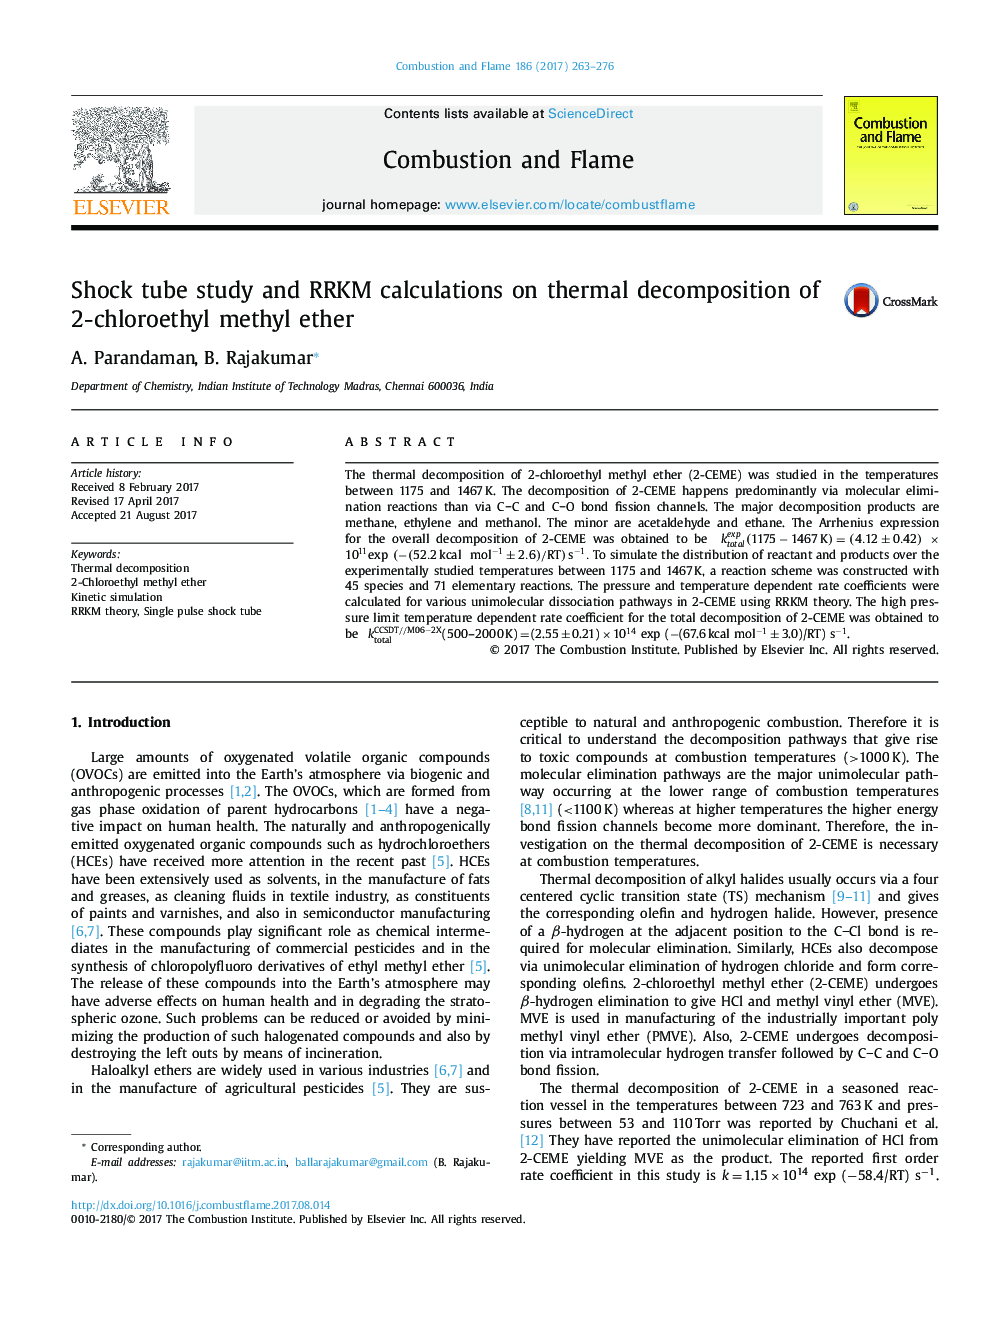 Shock tube study and RRKM calculations on thermal decomposition of 2-chloroethyl methyl ether